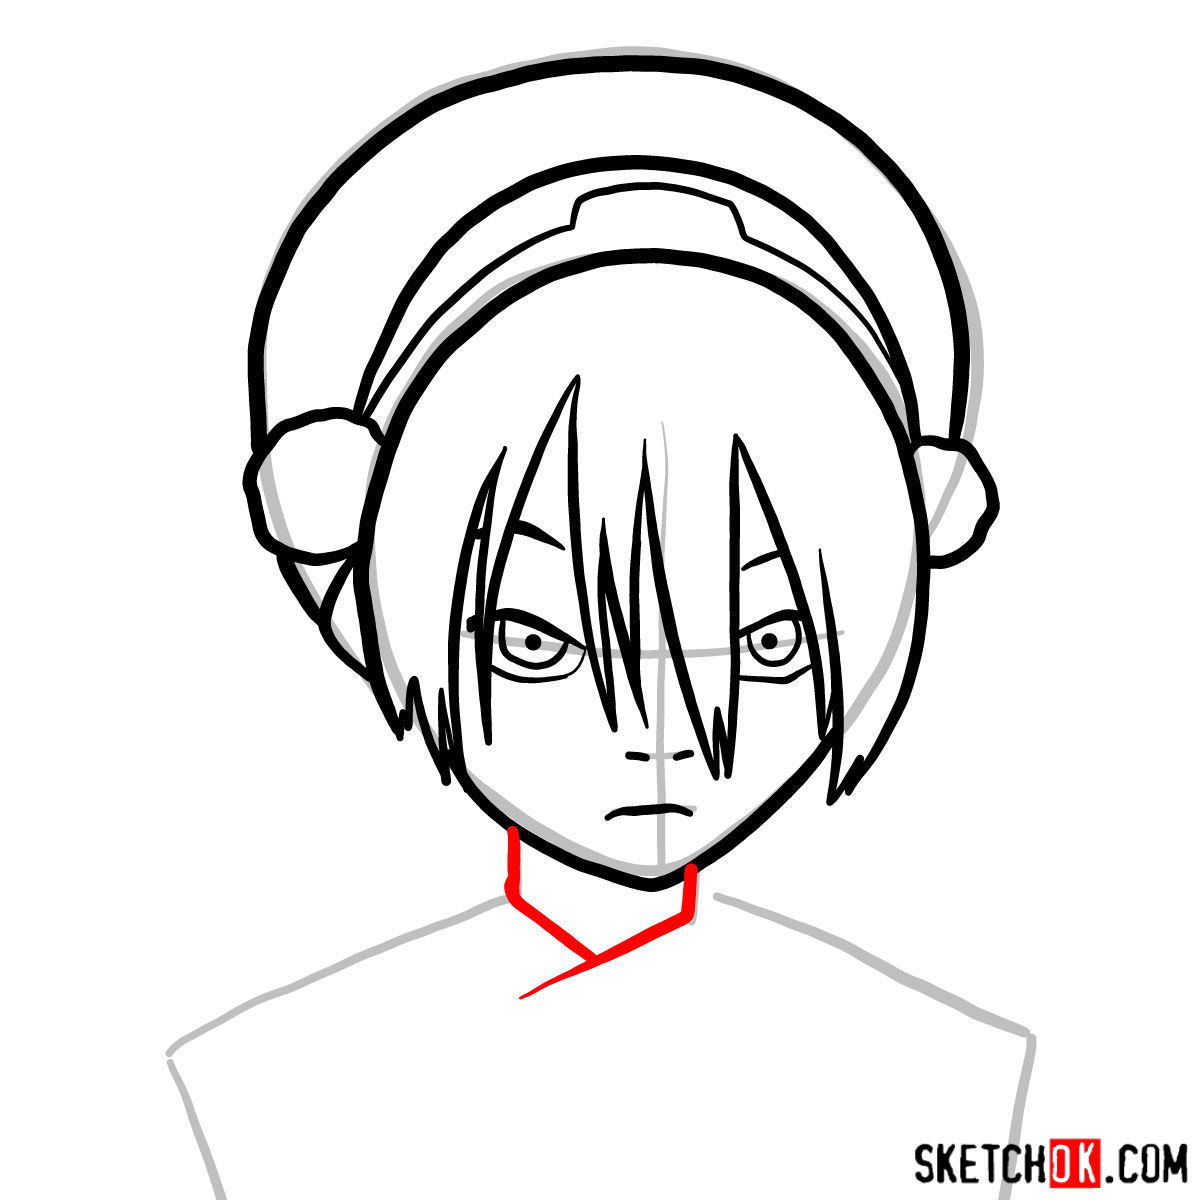 How to draw Toph Beifong's face - step 06